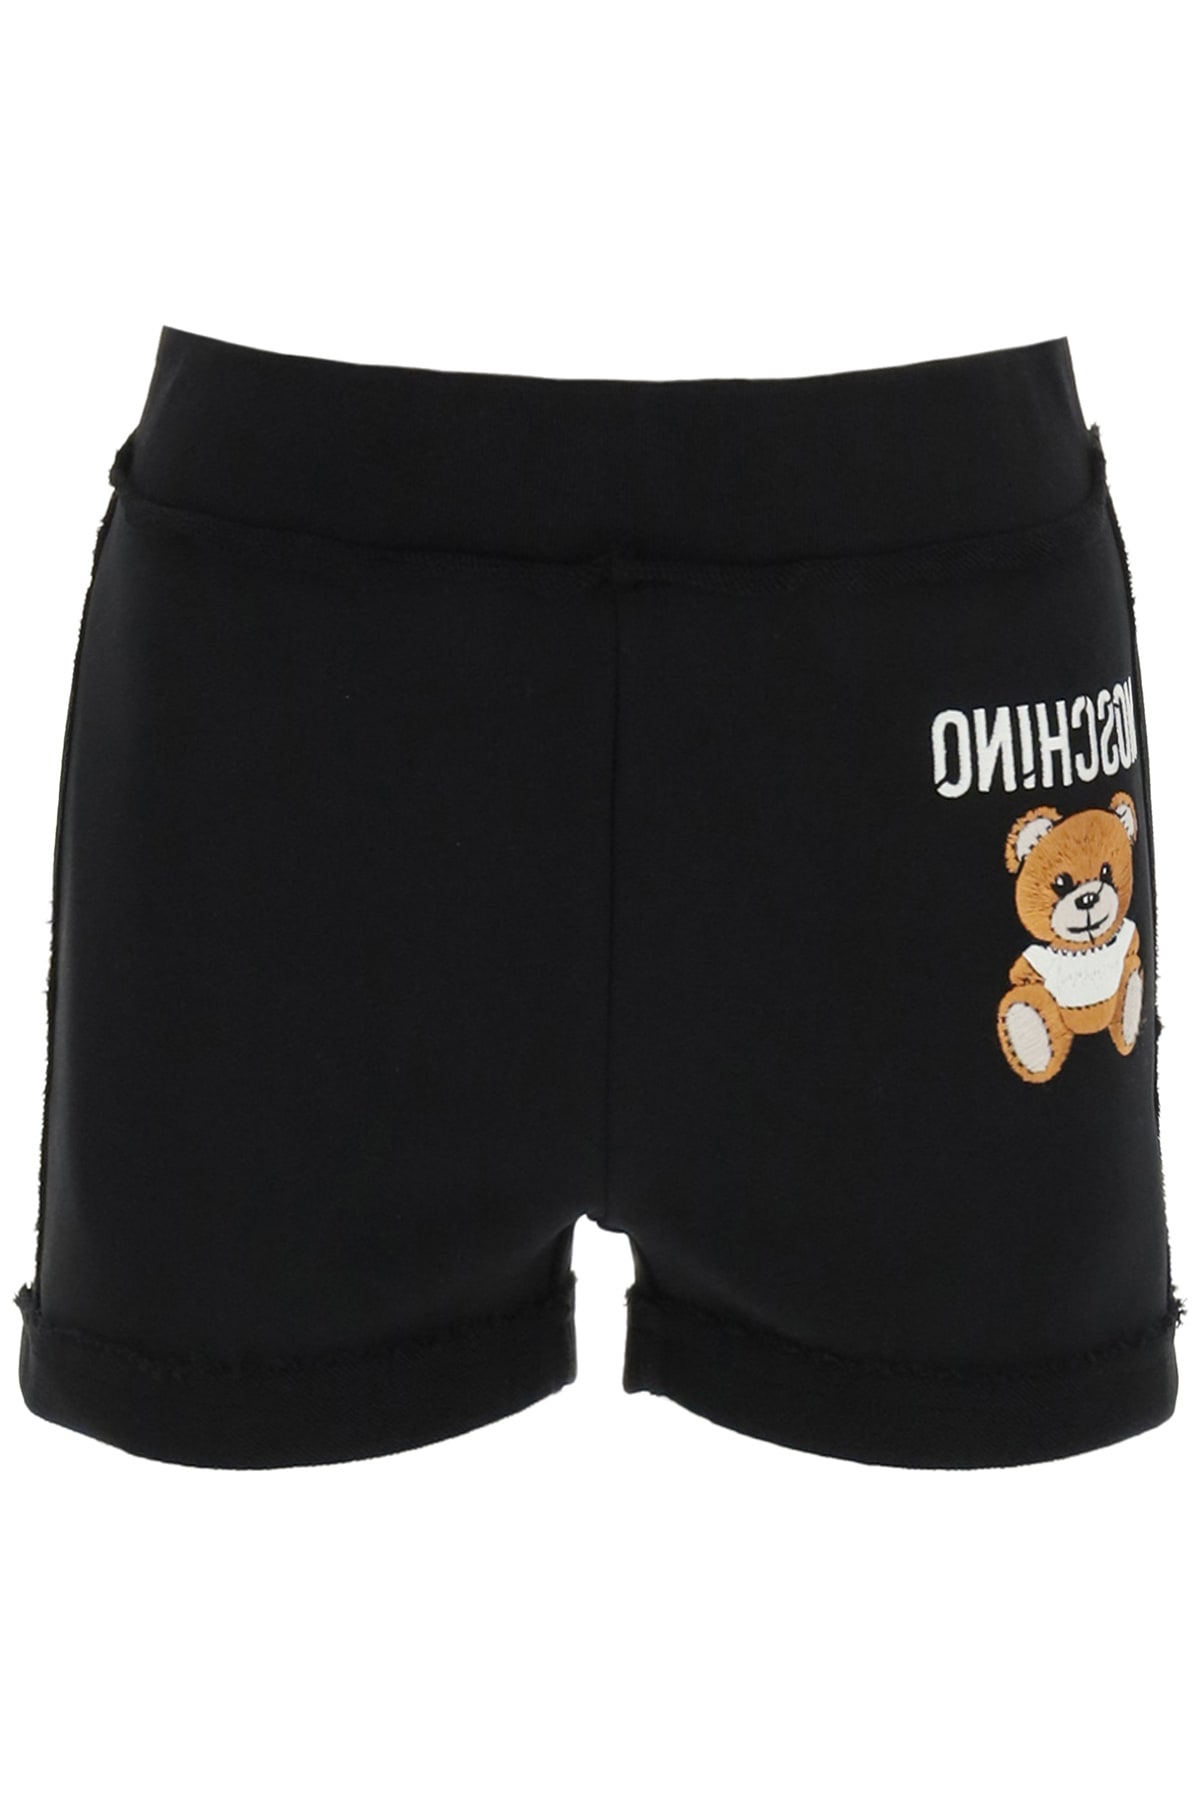 MOSCHINO INSIDE OUT TEDDY BEAR SHORTS,A0319 427 1555